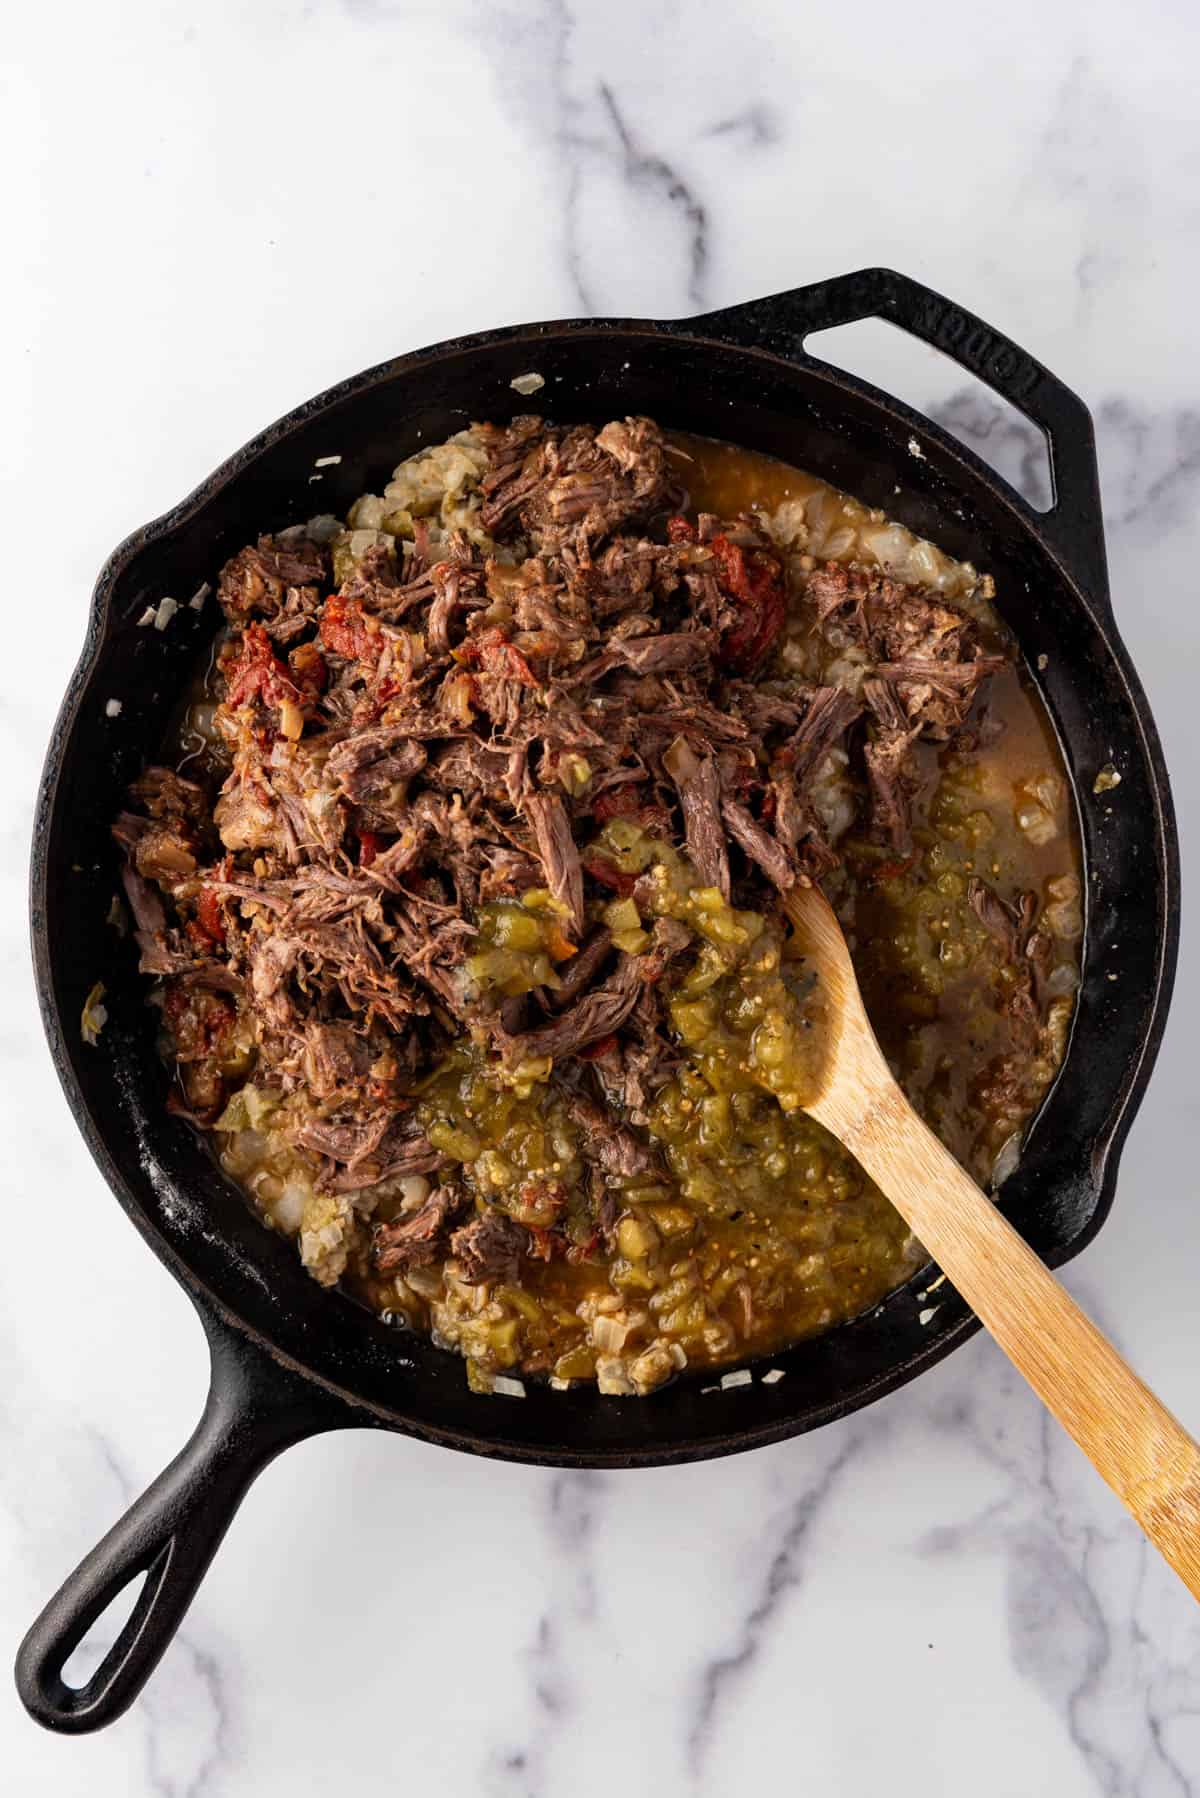 An overhead image of shredded beef chimichangas filling in a cast iron skillet.